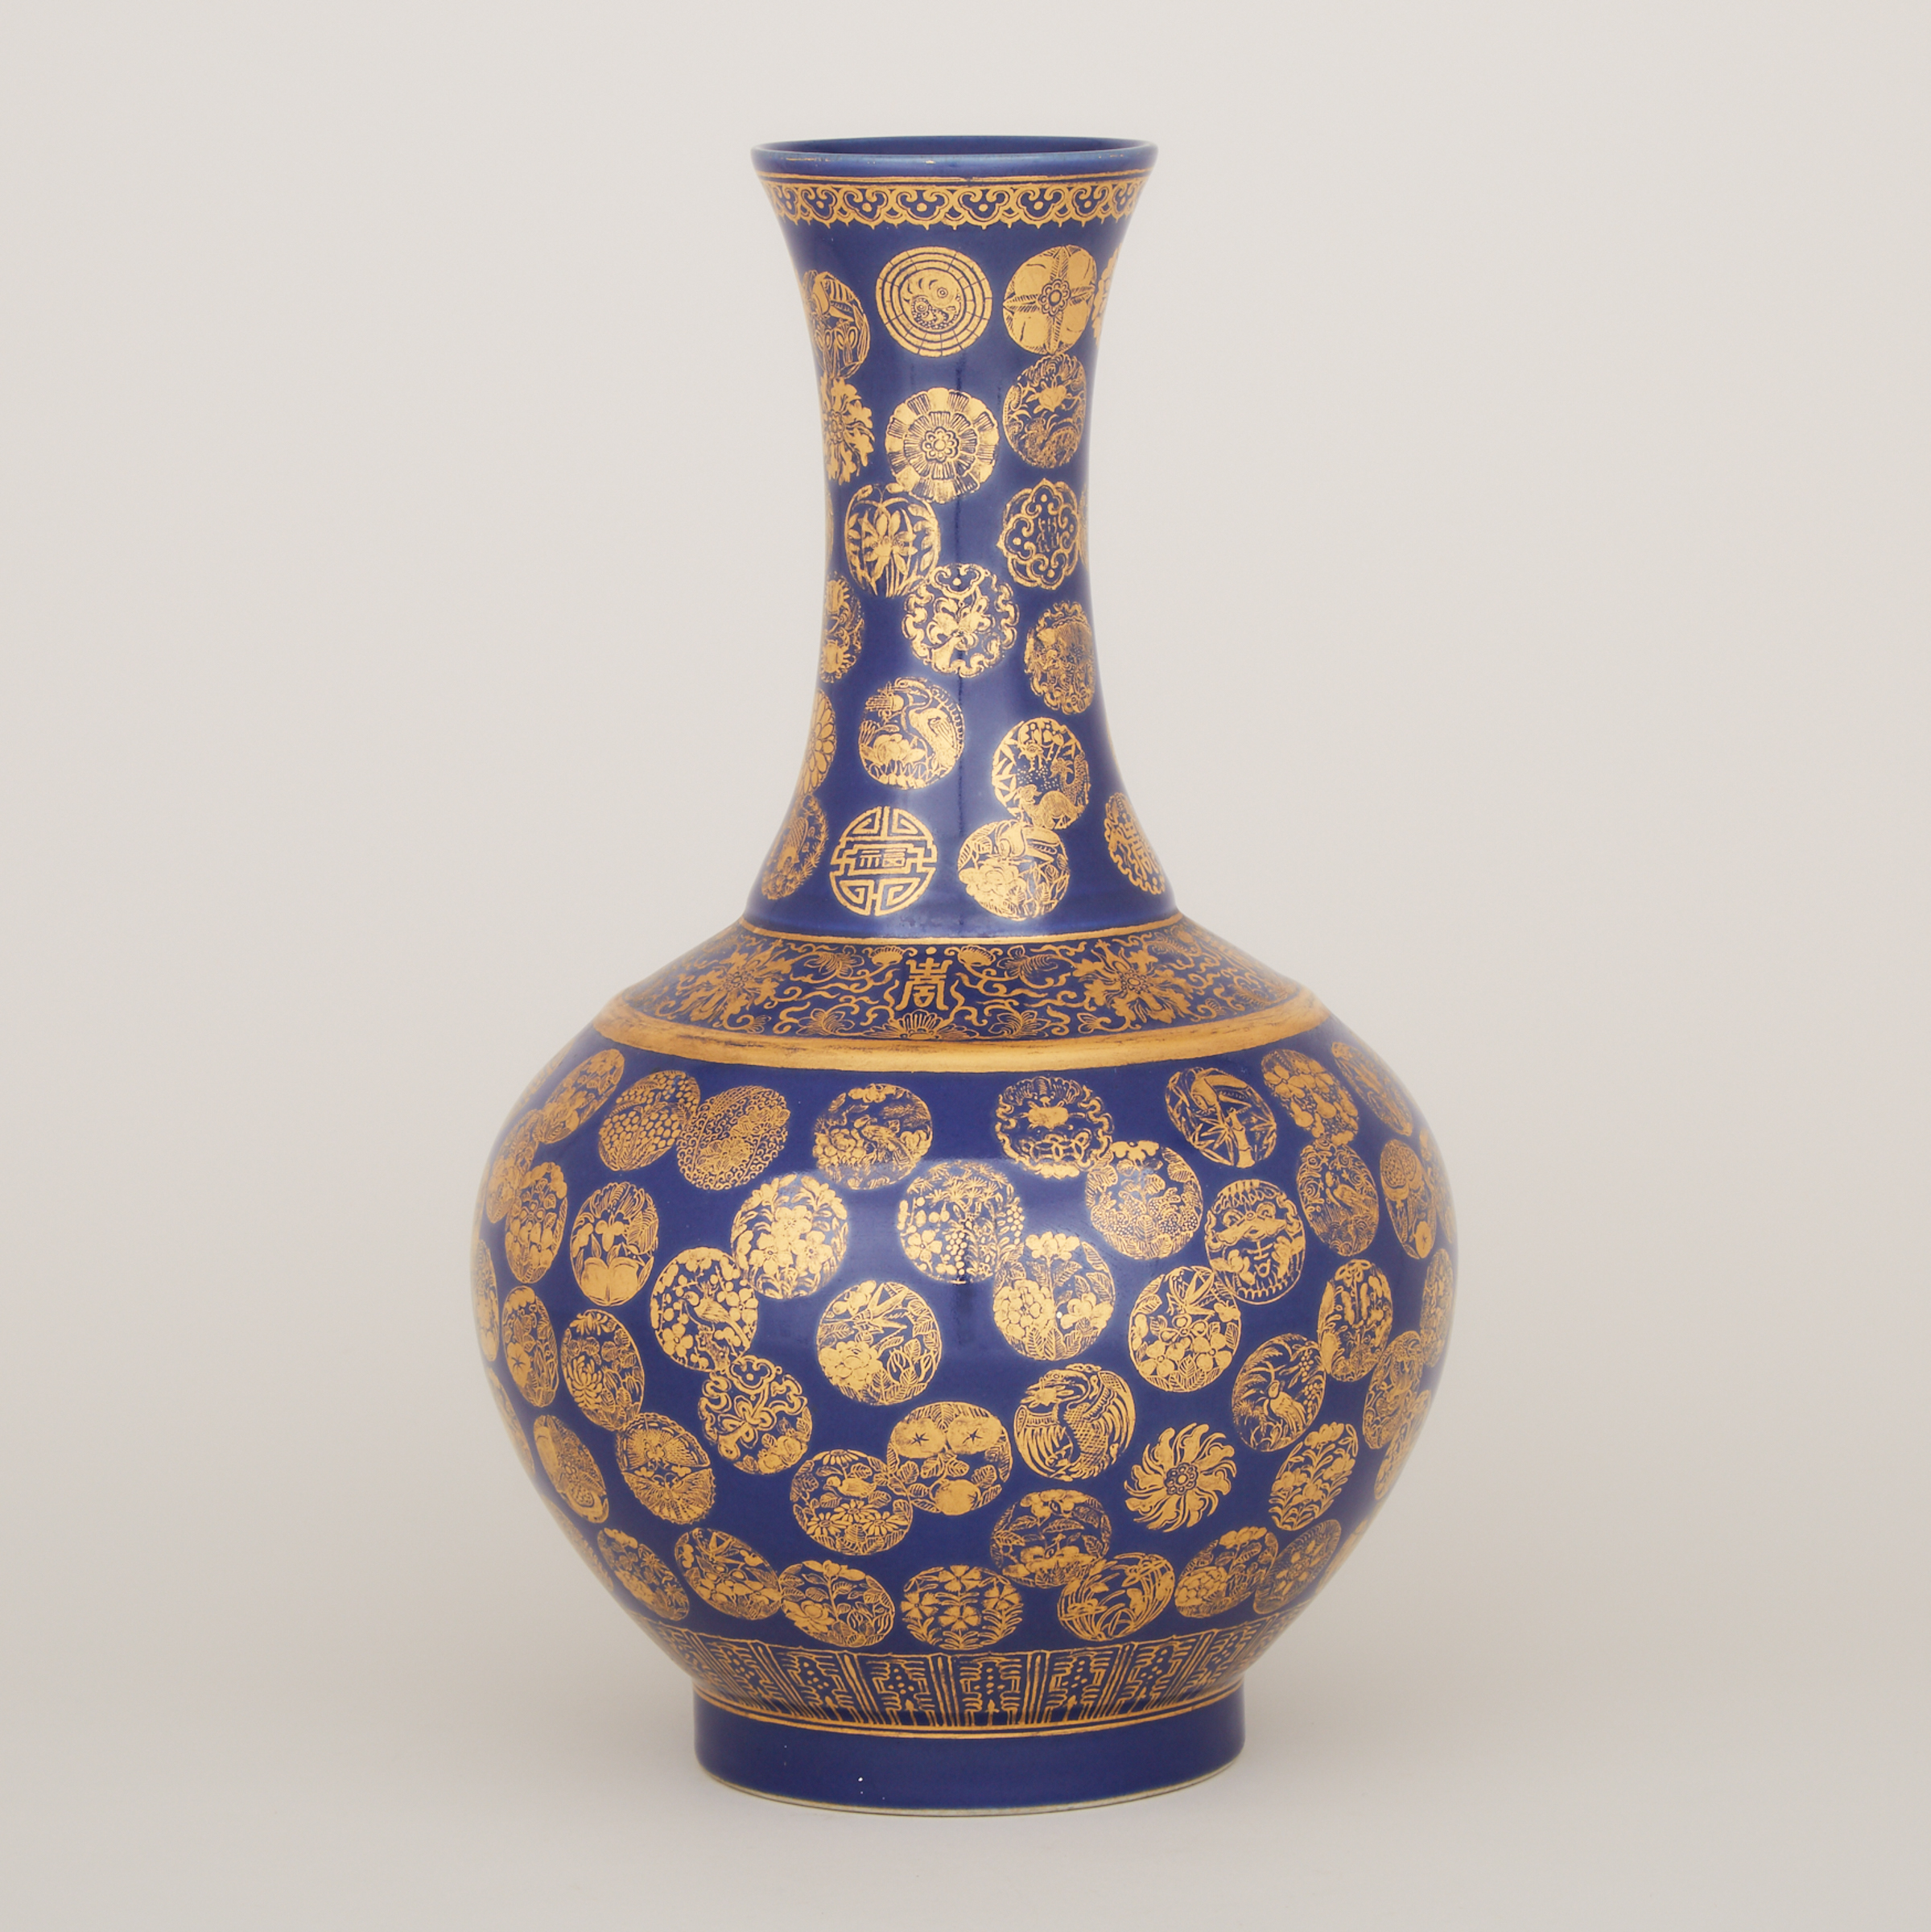 A Powder-Blue and Gilt-Decorated 'Medallion' Bottle Vase, Guangxu Mark and Period (1875-1908)